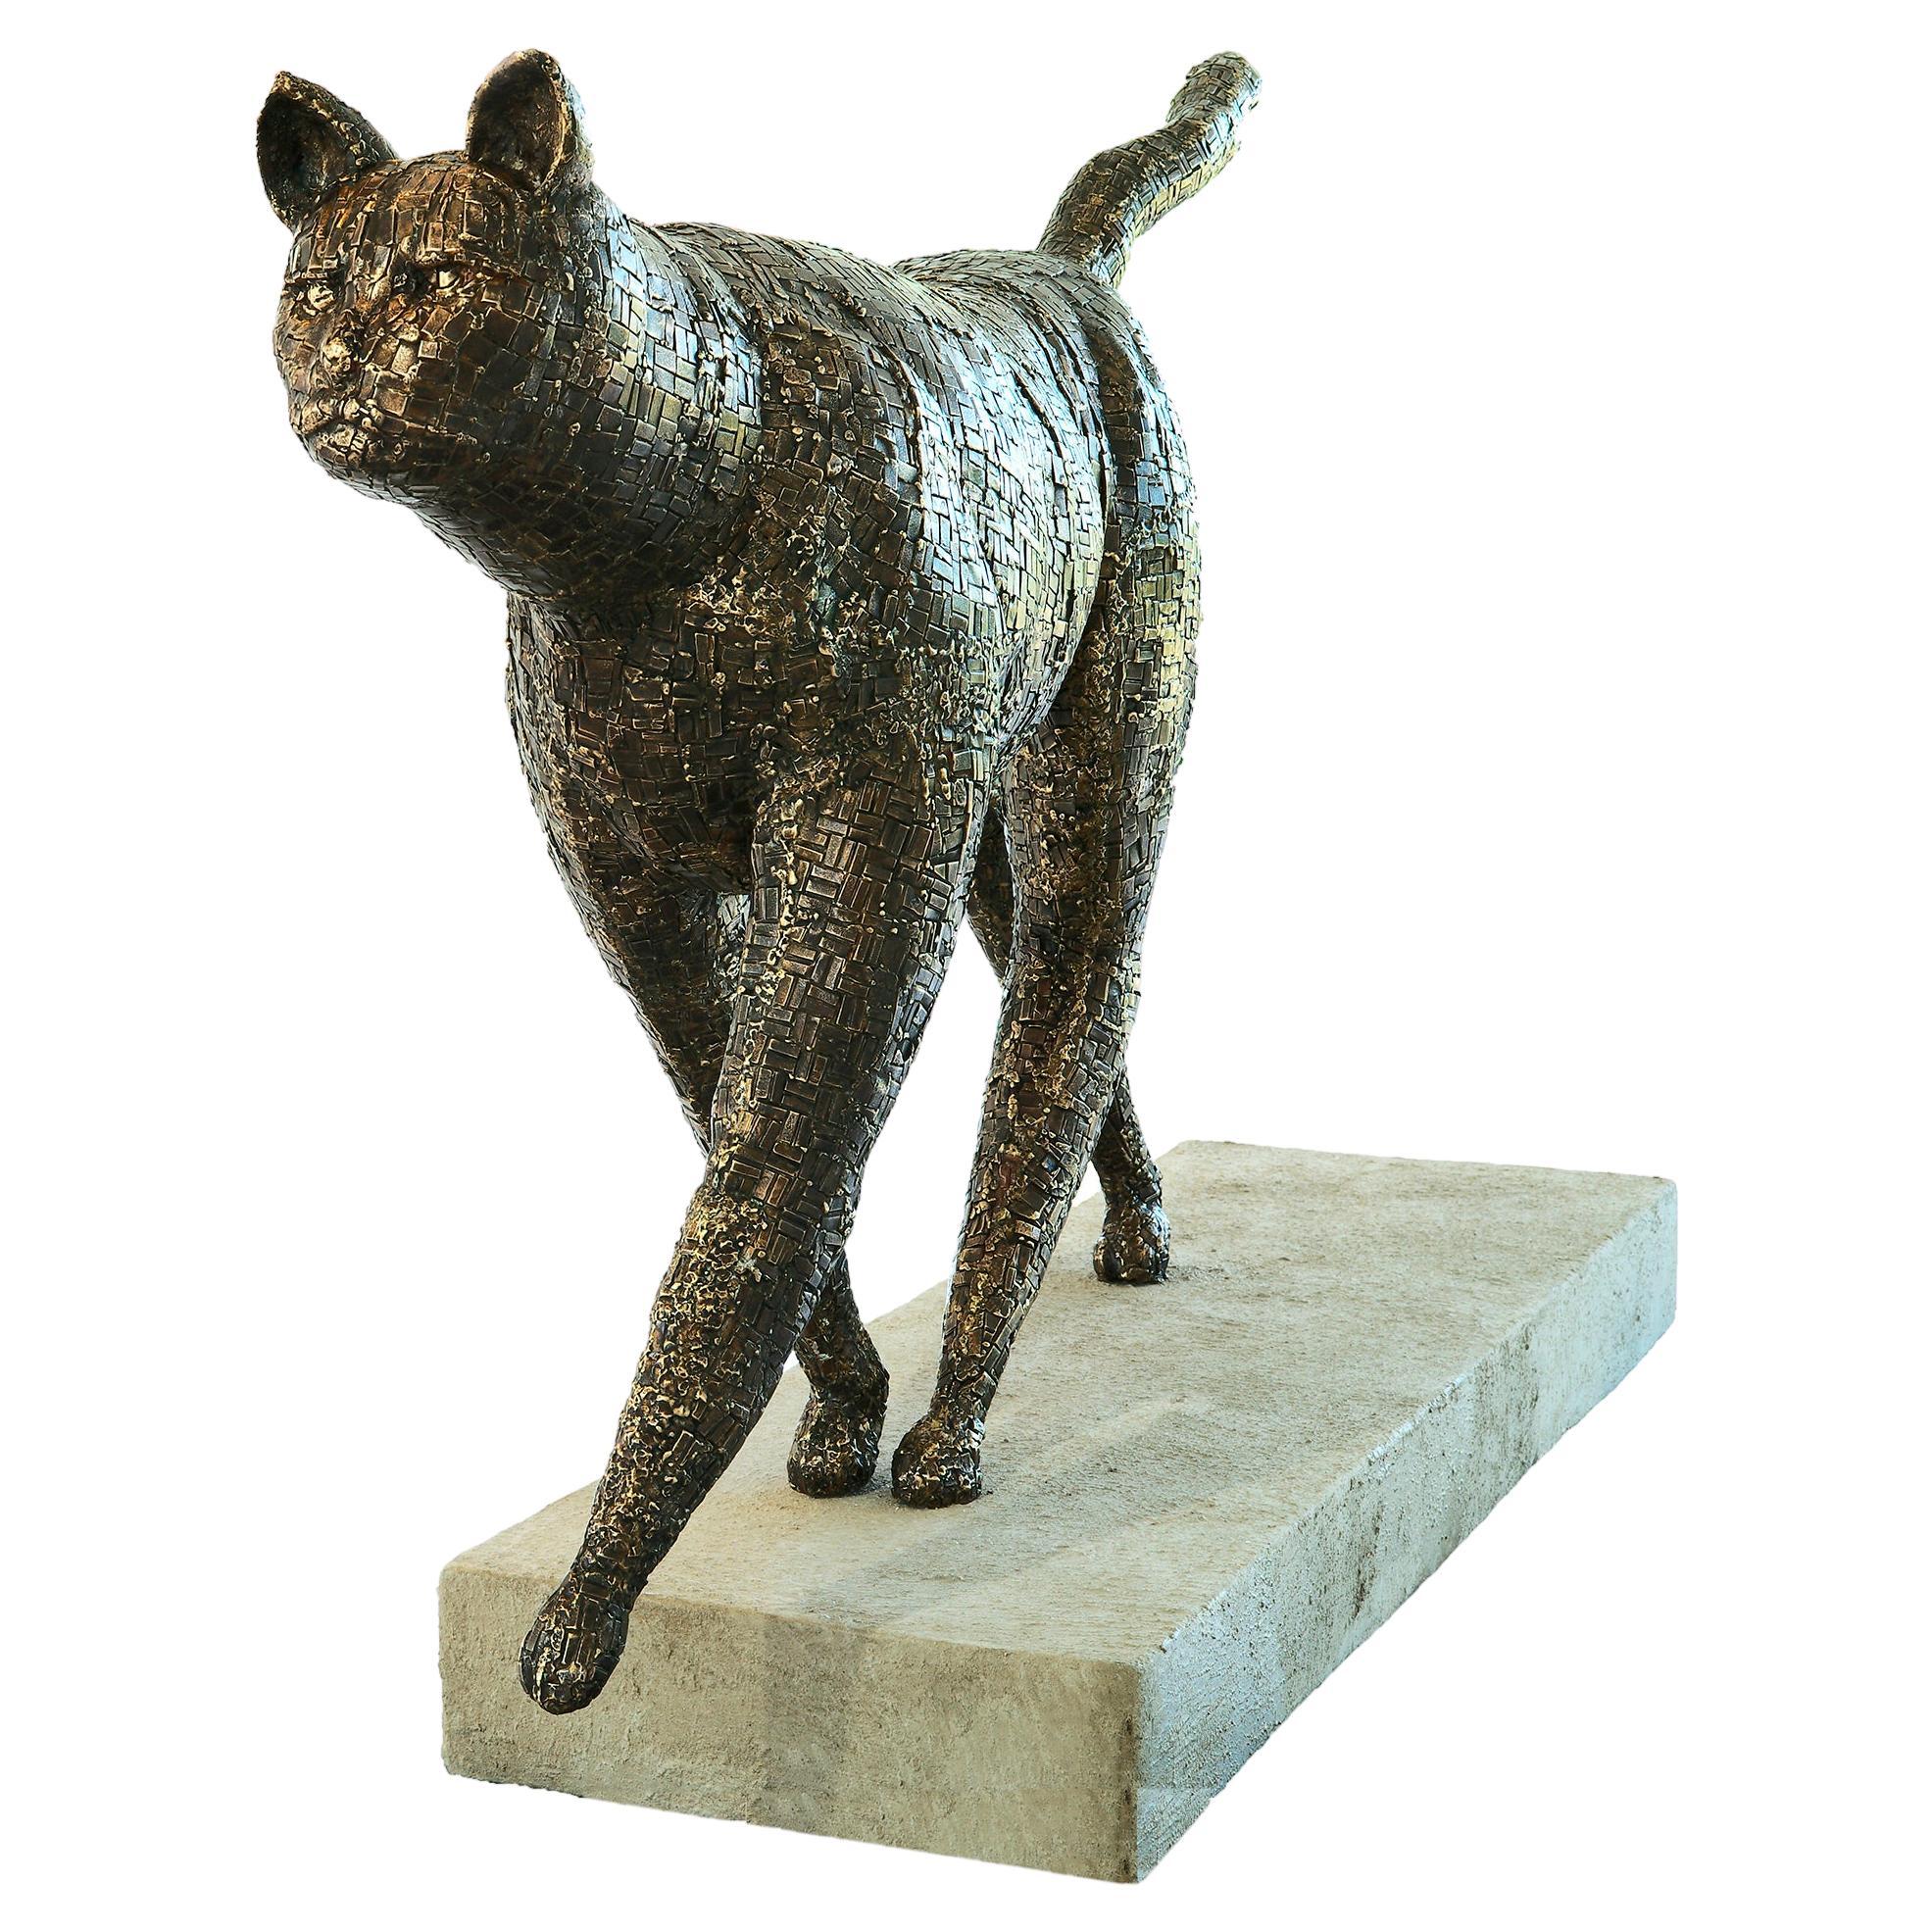 Walking Cat - Lion Sized Bronze Cat Sculpture with Mosaic Patterned Surface